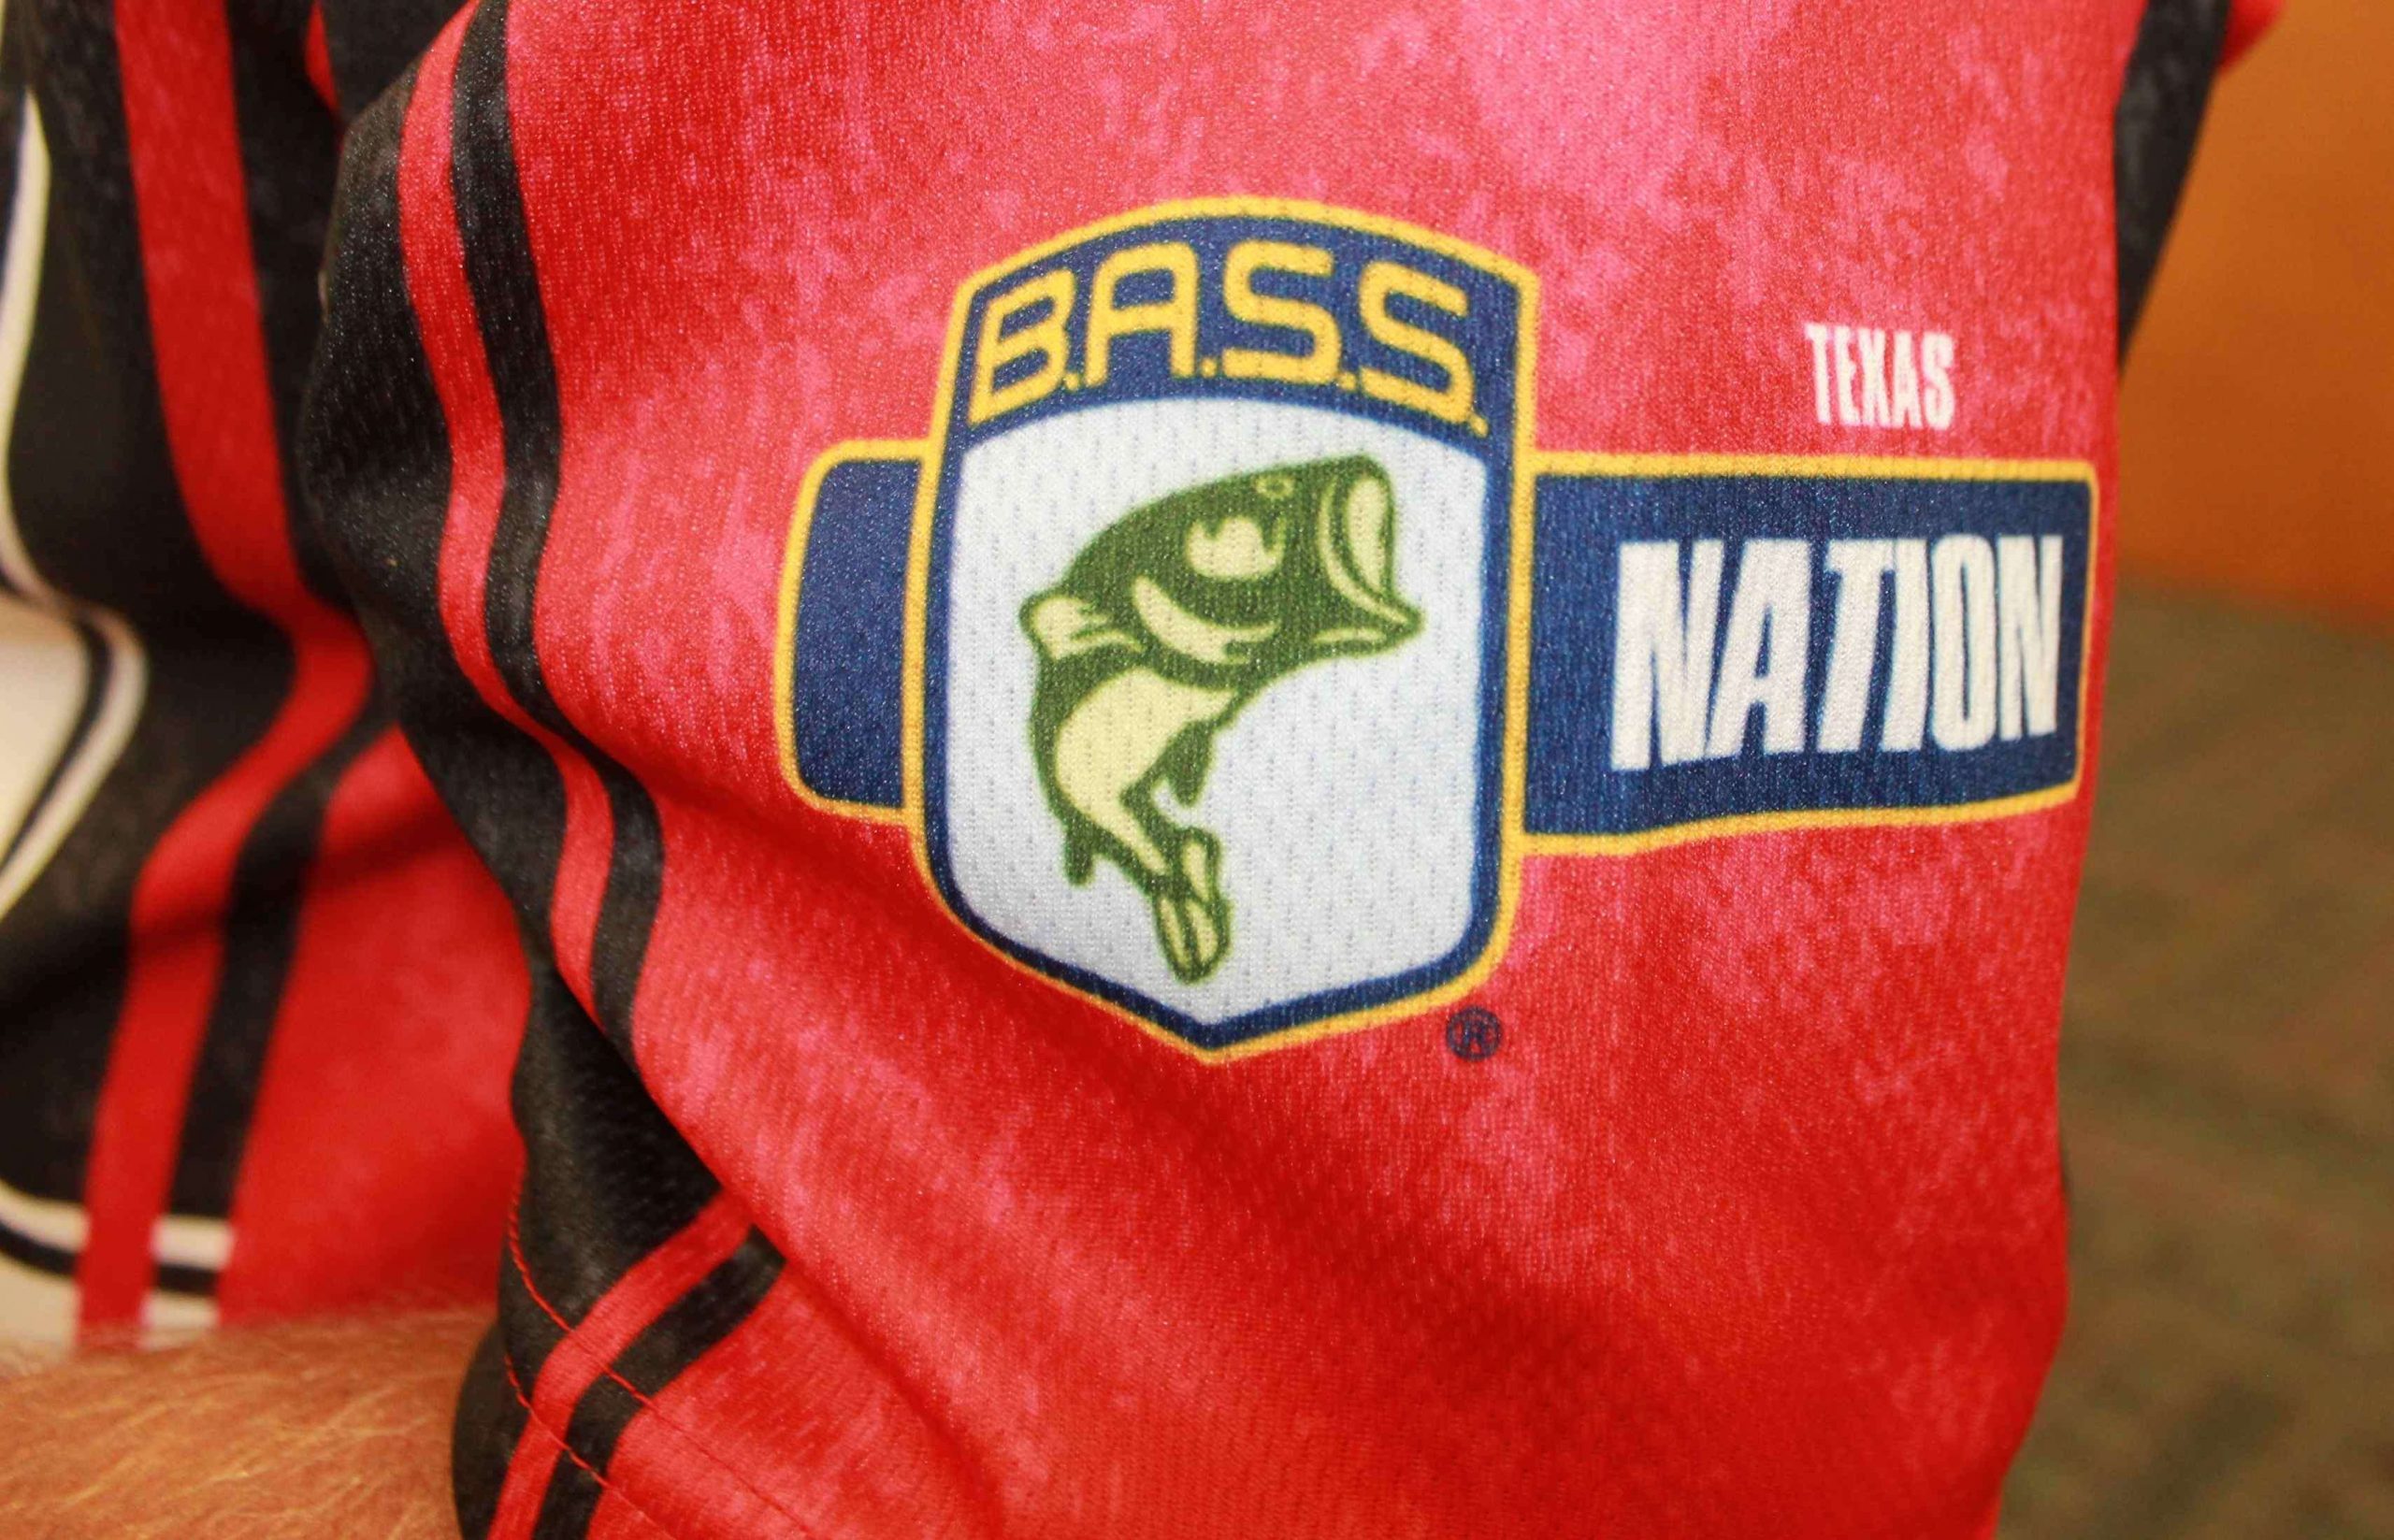 Texas B.A.S.S. Nation wears its pride on its sleeve.
